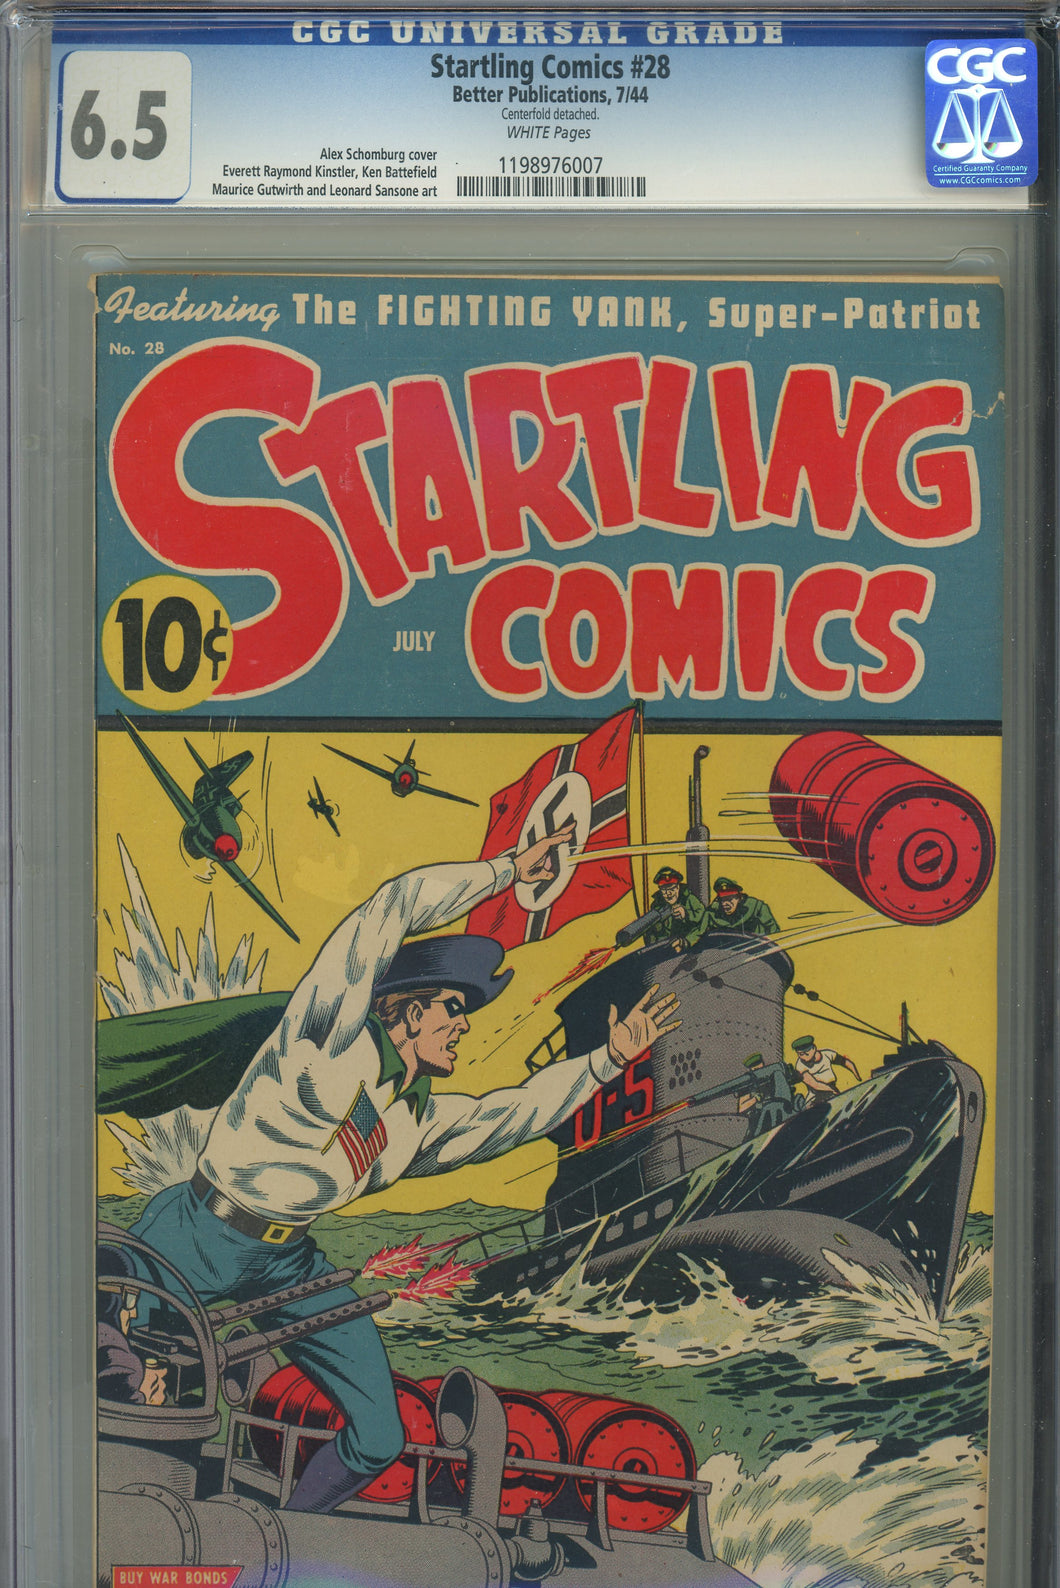 Startling Comics #28 CGC 6.5 White Pages